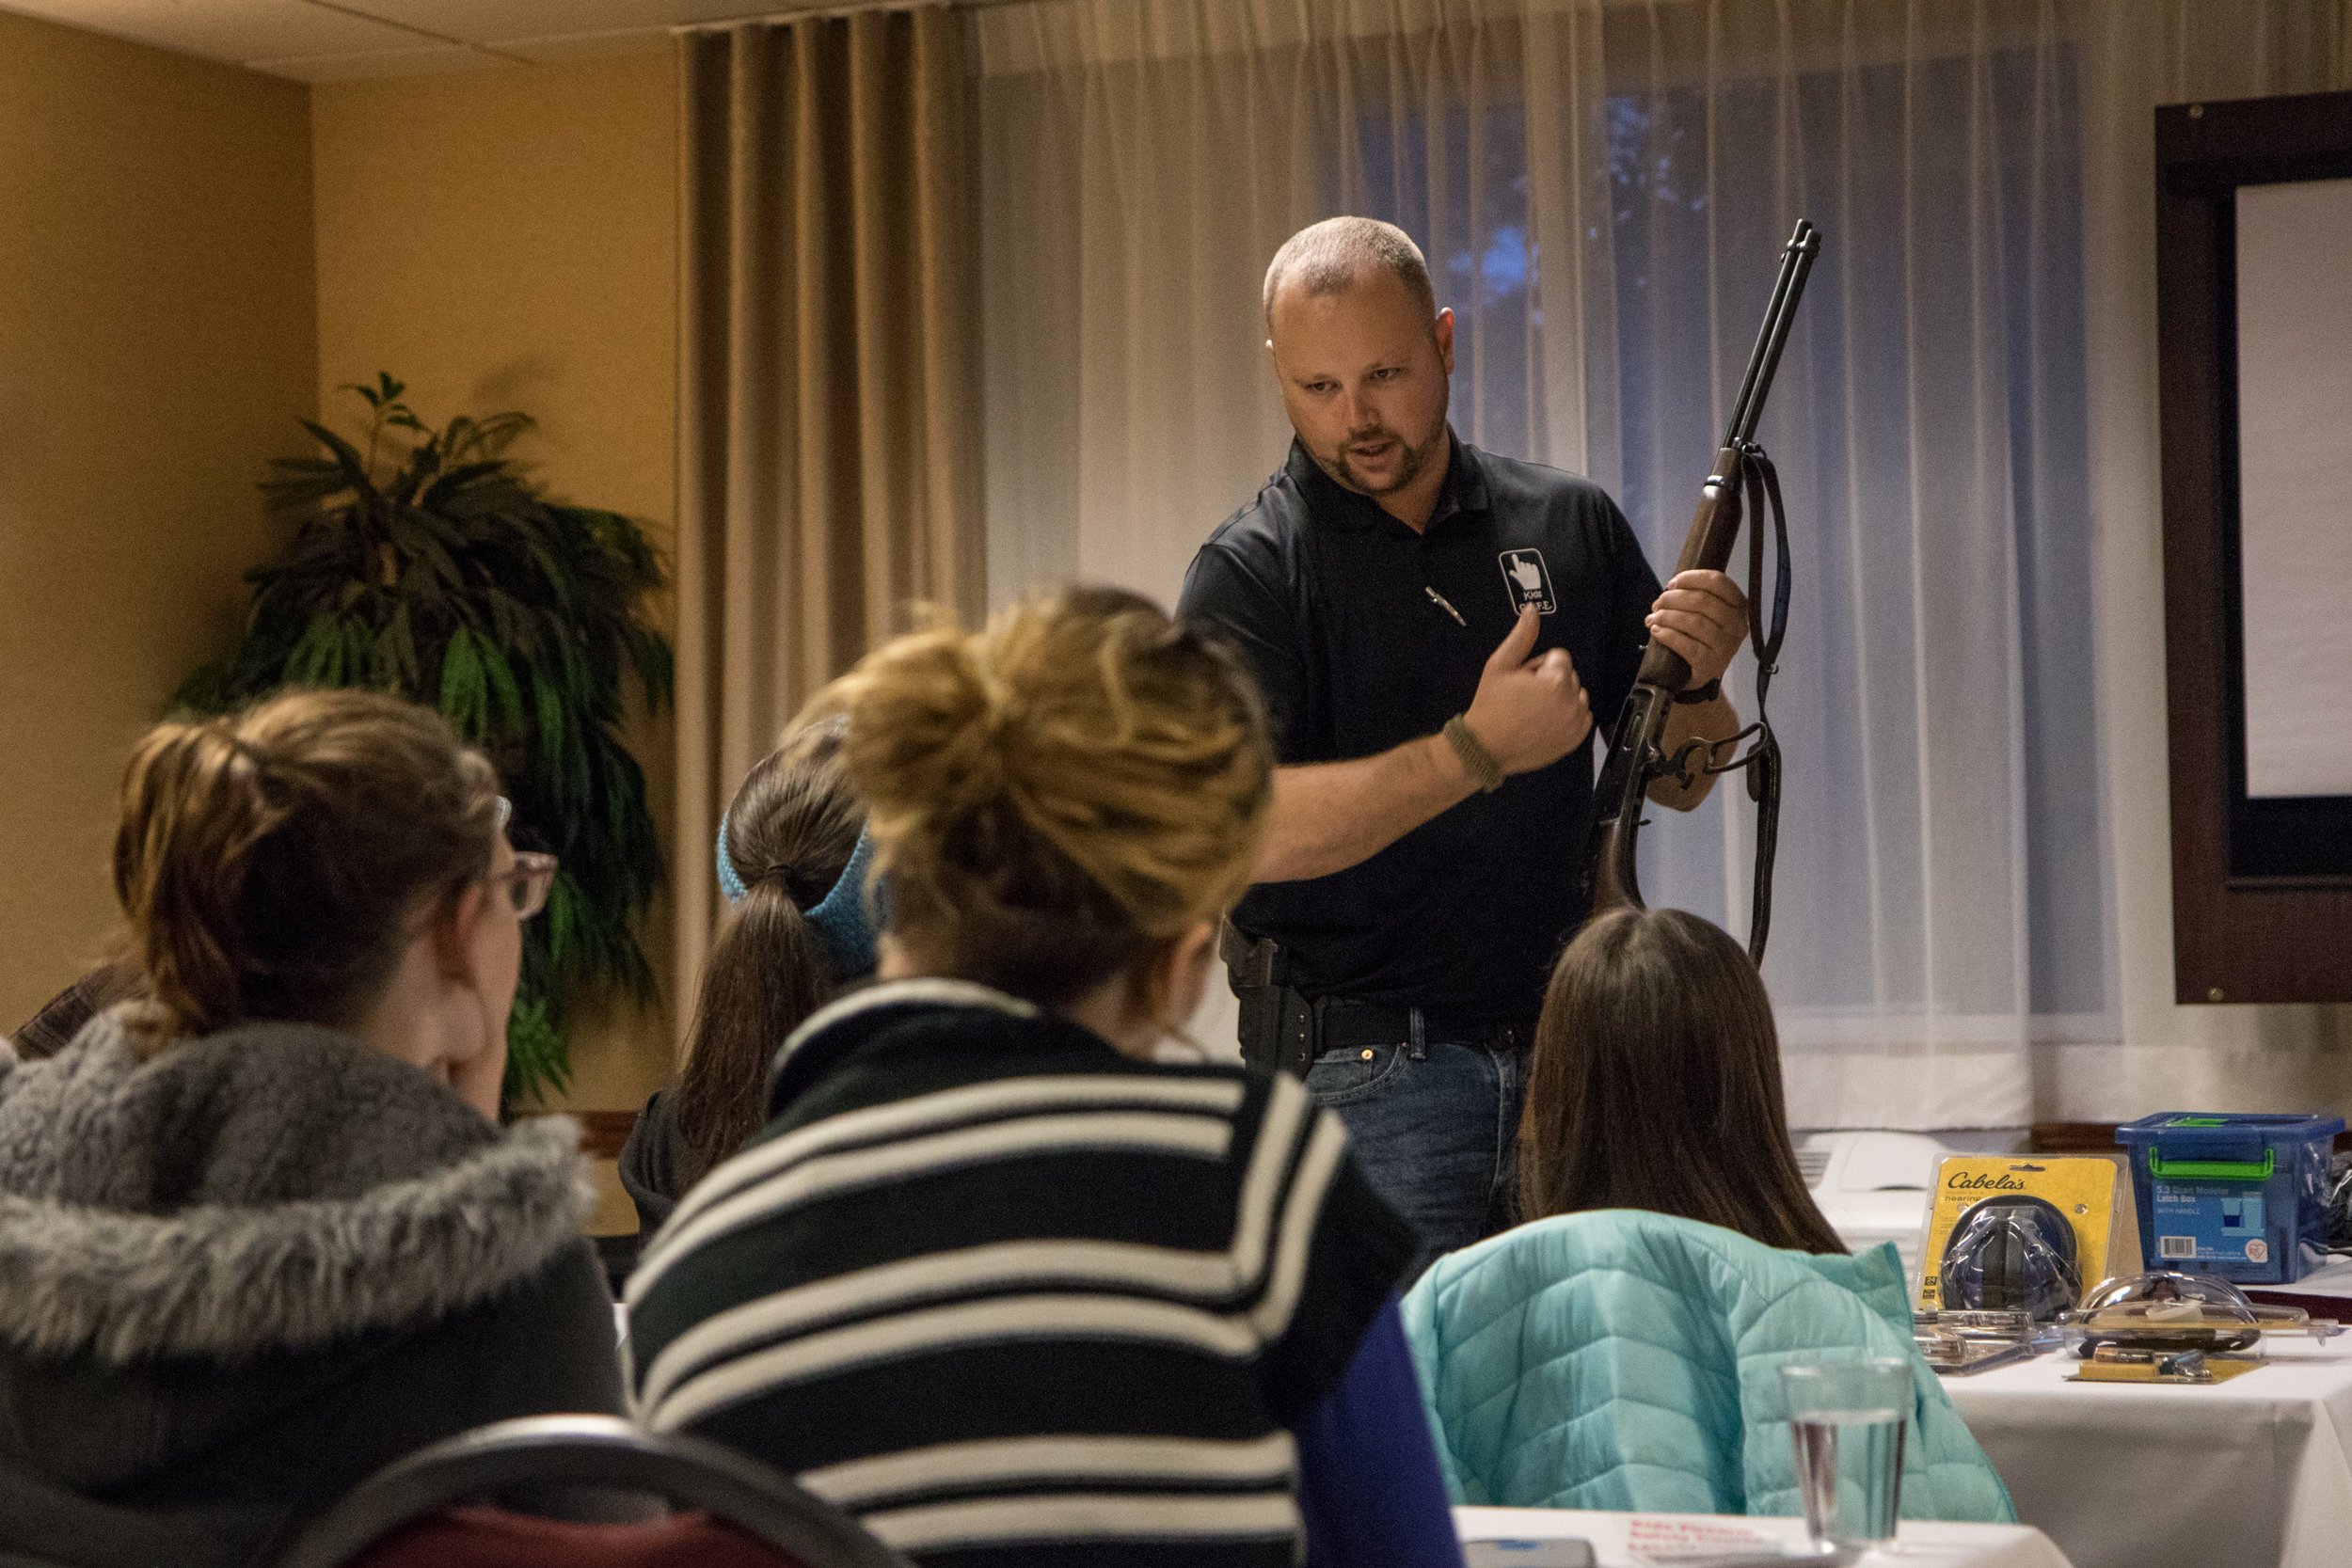  NRA certified firearms instructor Derek LeBlanc discusses proper handling of a lever-action rifle at a Kids S.A.F.E. gun safety course in Springfield, Ore., on Jan. 22, 2017. "I want everyone to be armed, but I also don't want any family to experien